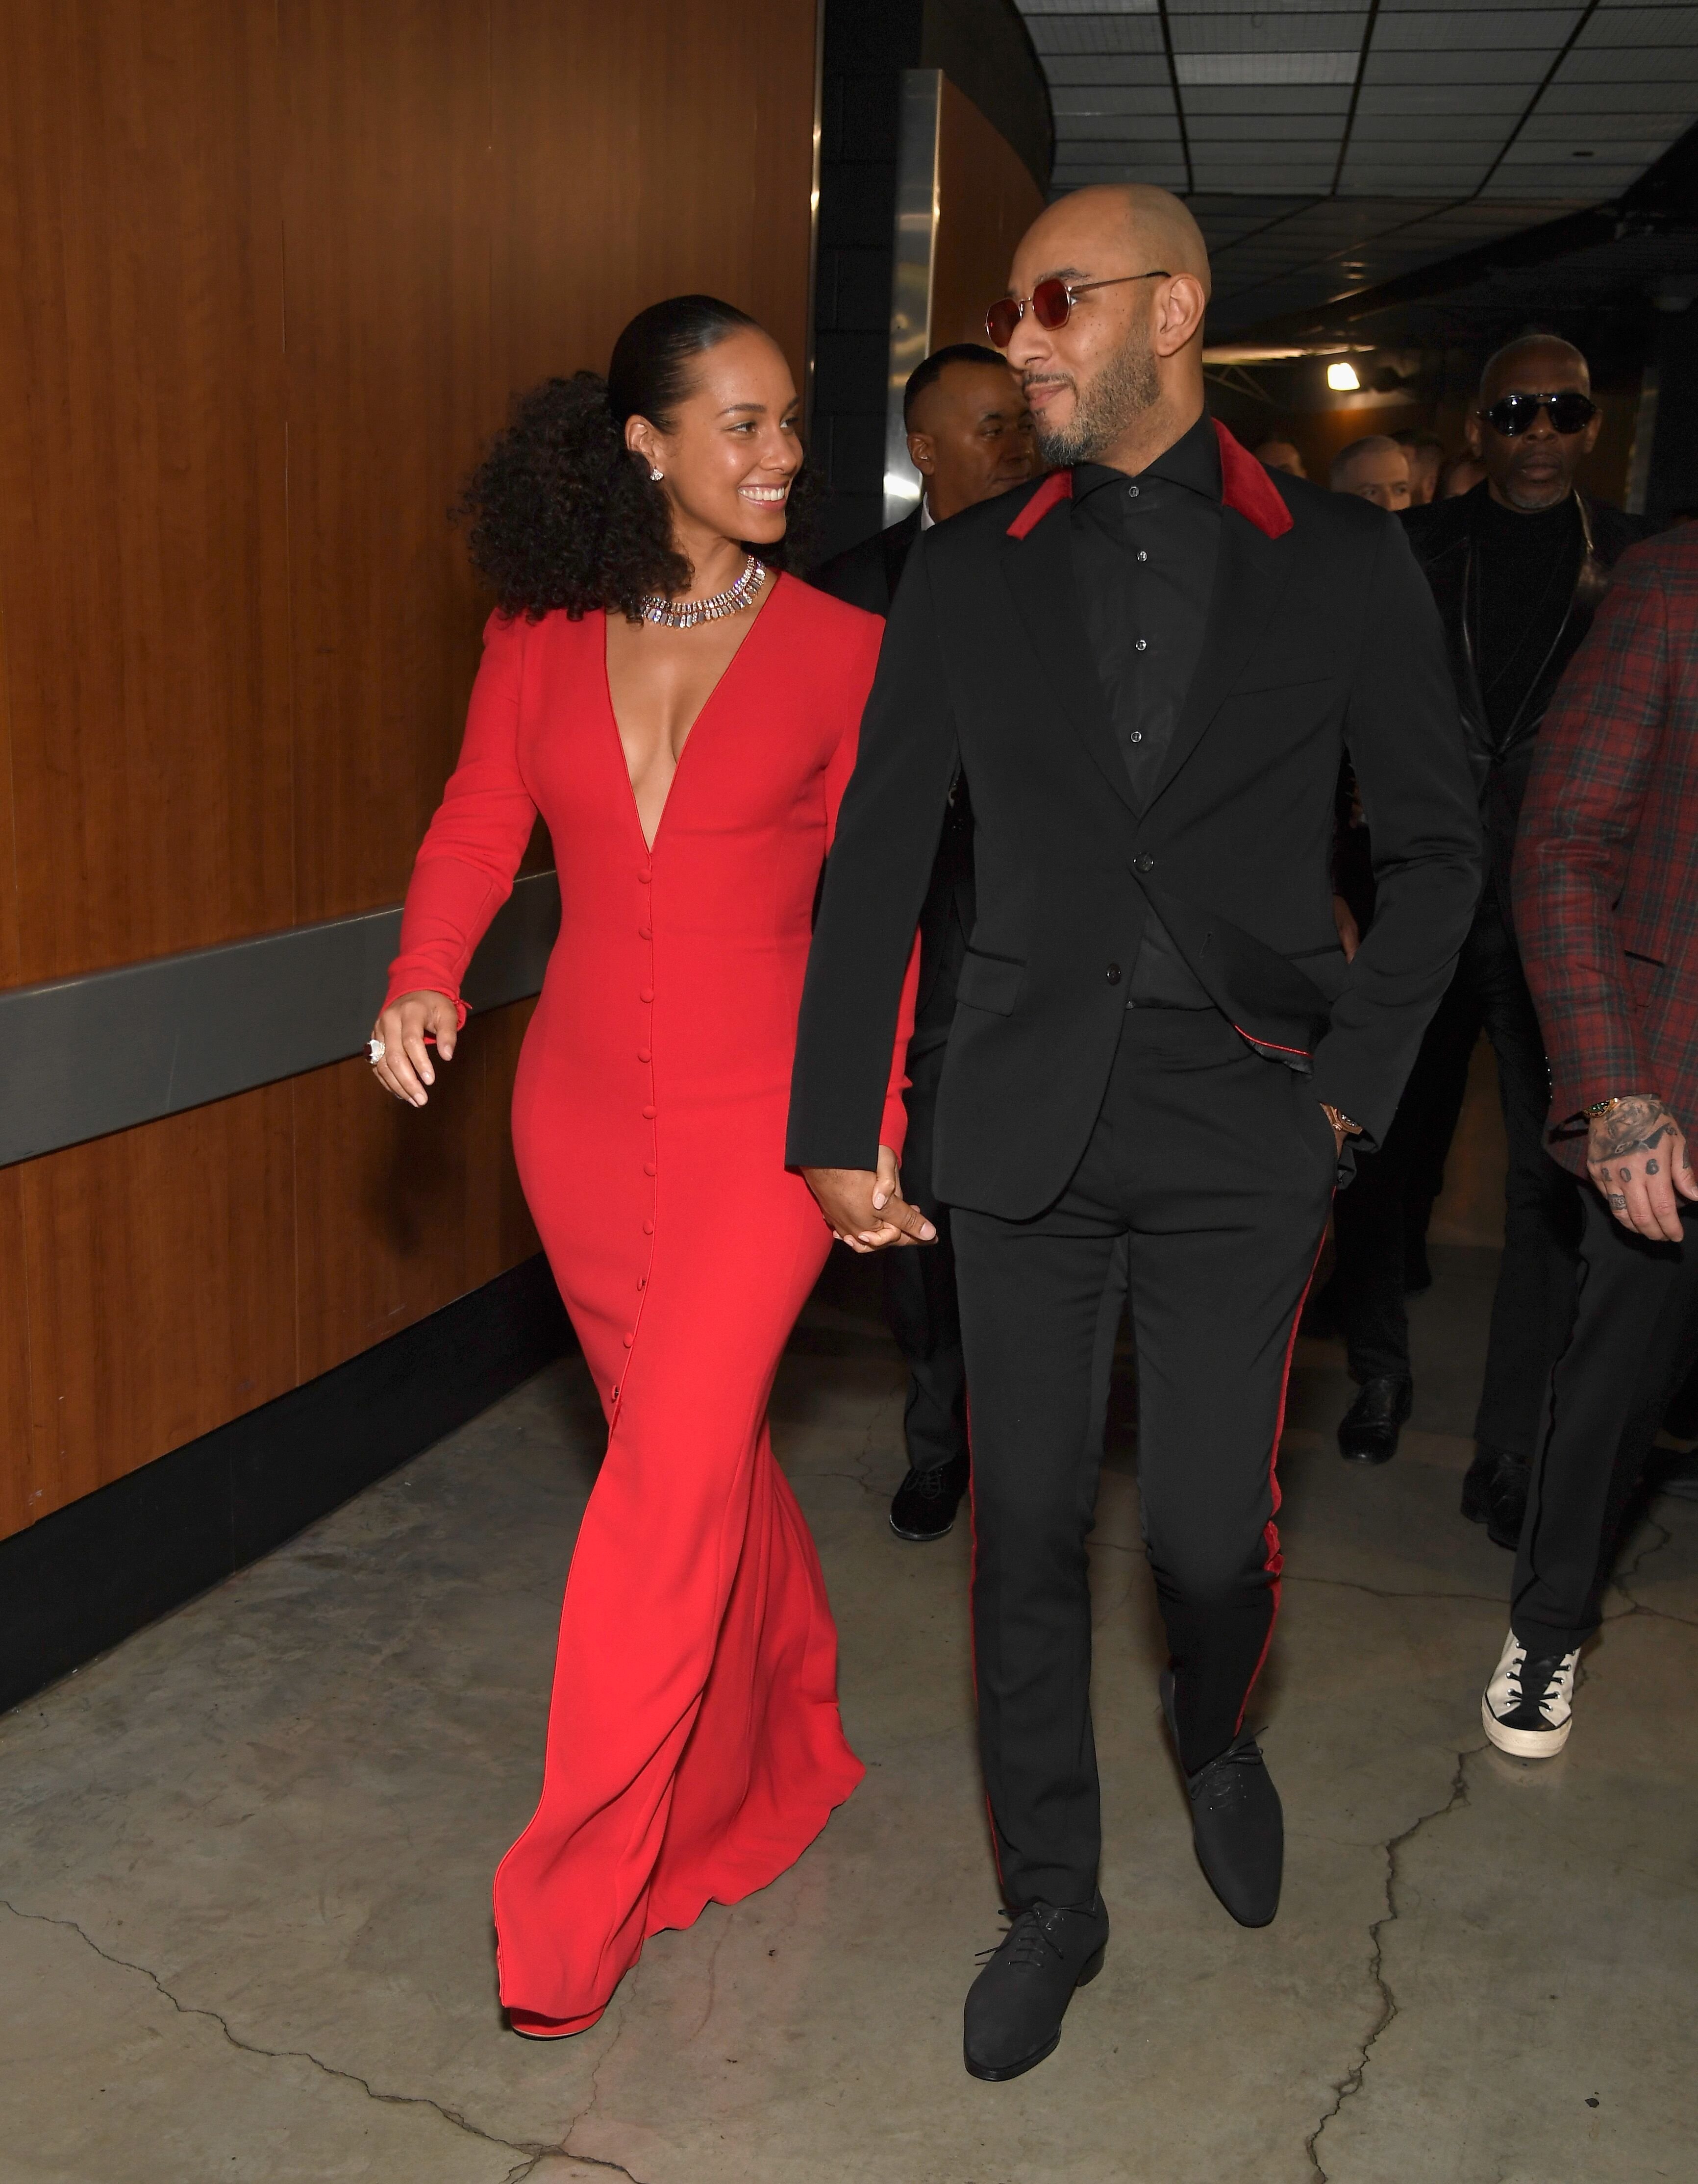 Alicia Keys (L) and husband rapper Swizz Beatz backstage during the 61st Annual GRAMMY Awards at Staples Center | Photo: Getty Images